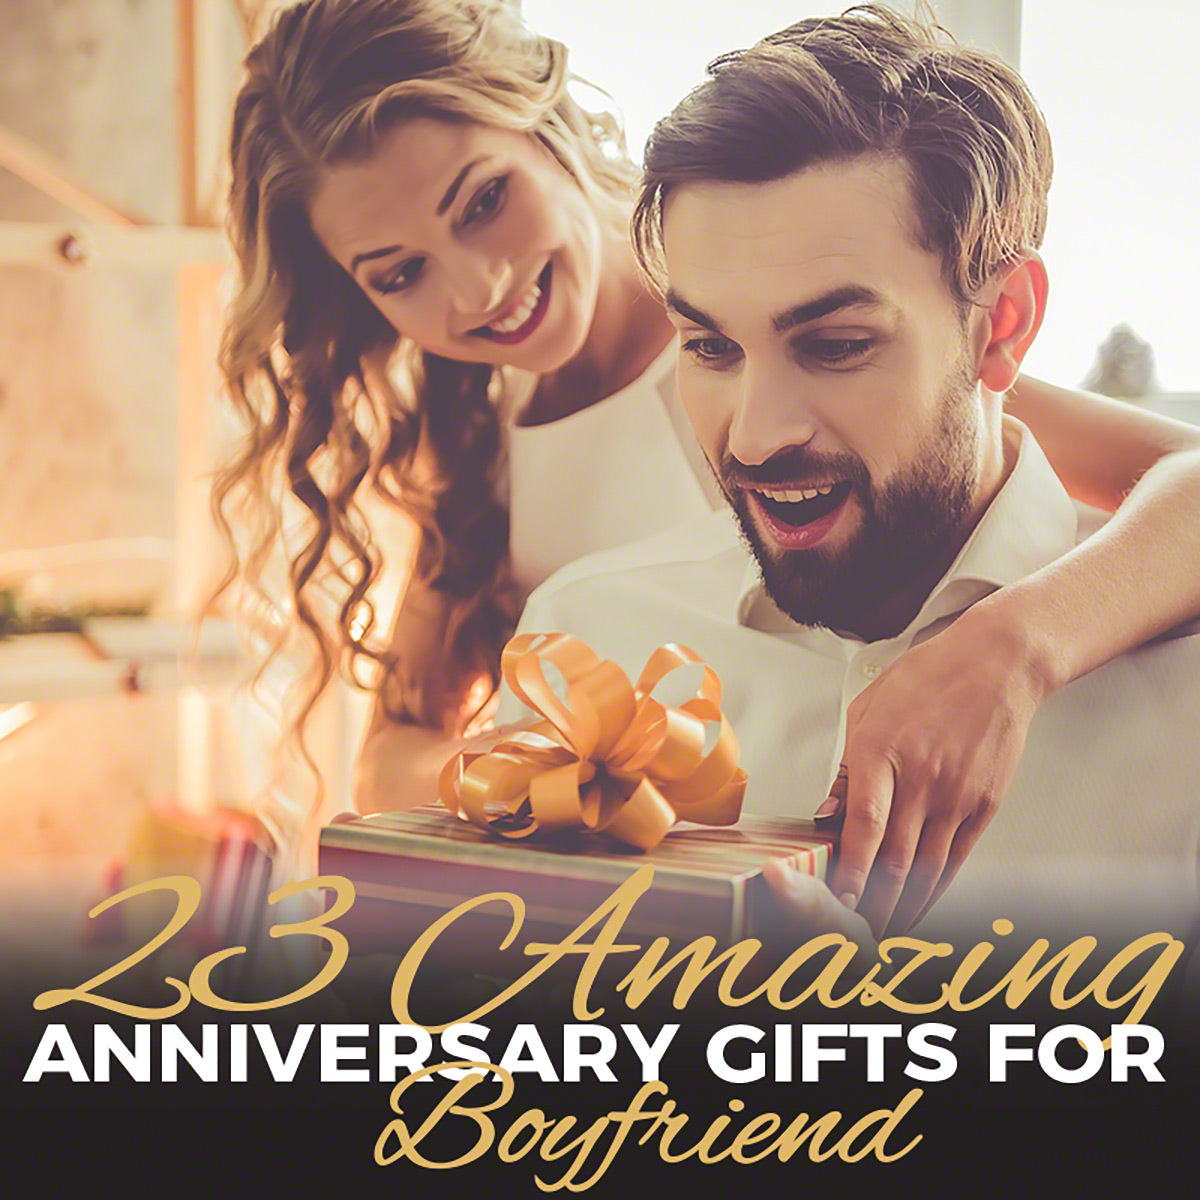 12 Great Anniversary Gifts For Your Boyfriend You'll BOTH Love - Ridge